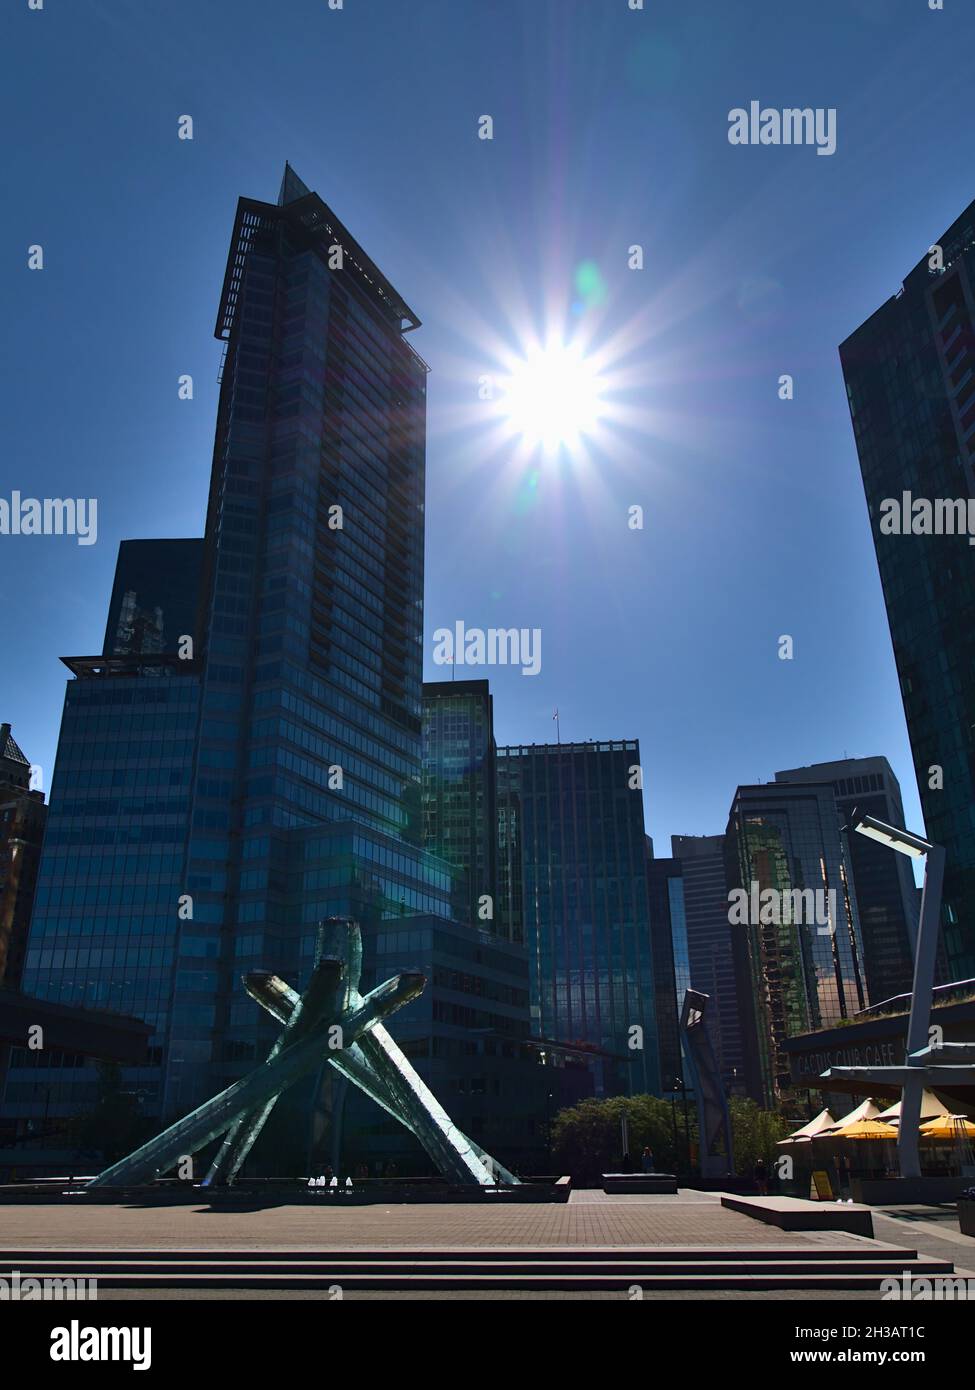 Beautiful view of Jack Poole Plaza in Vancouver downtown with the cauldron of the 2010 Olympic Winter Games and bright sun shining between skycrapers. Stock Photo